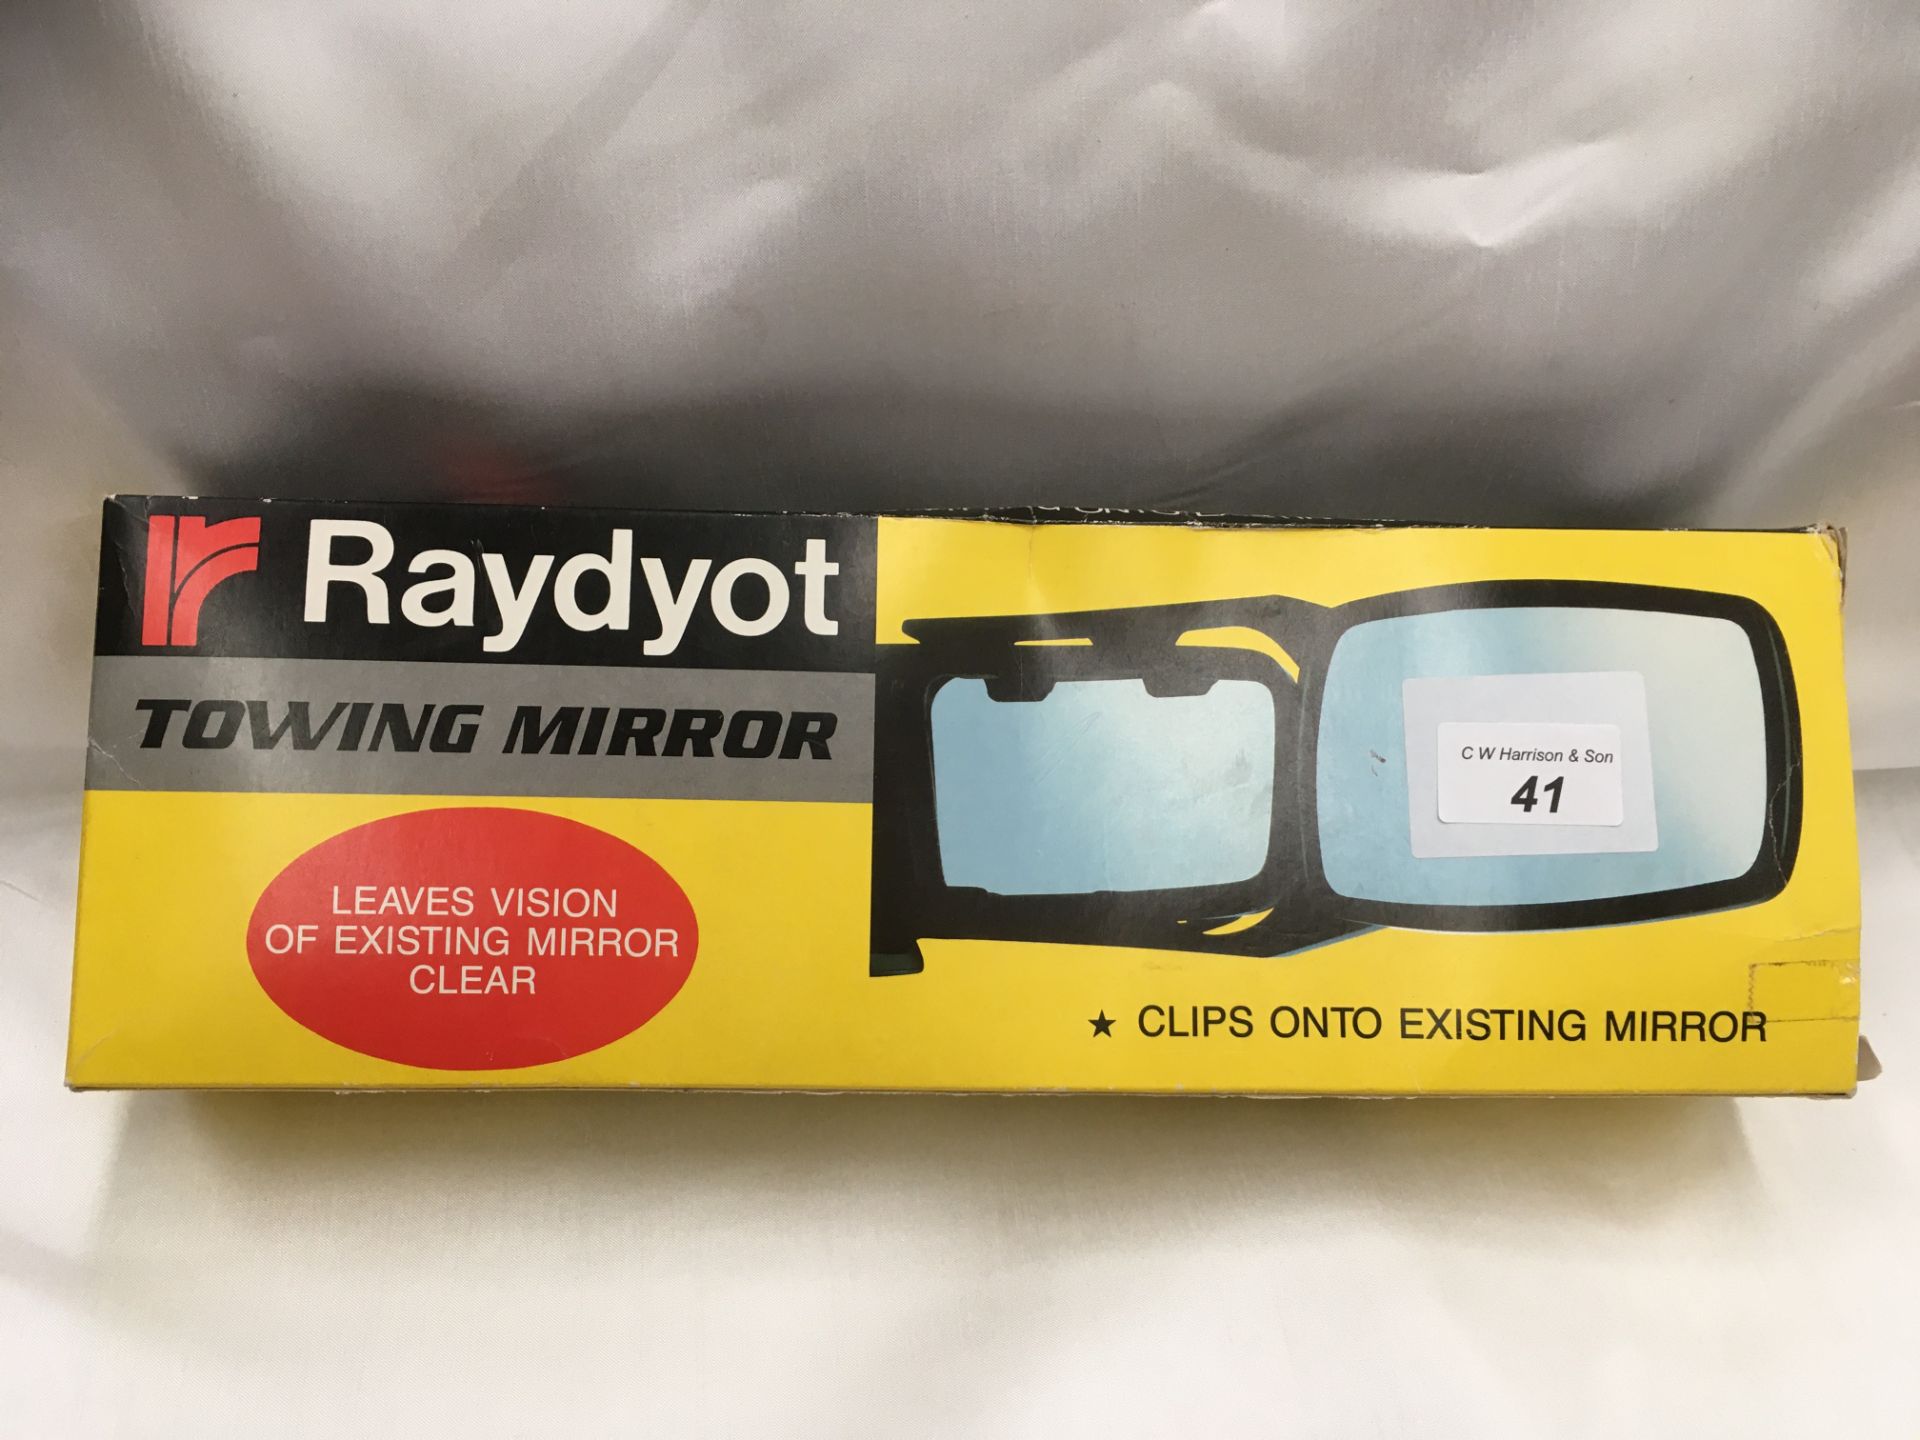 Raydyot trailer caravan mirror clips onto existing mirror either hand.